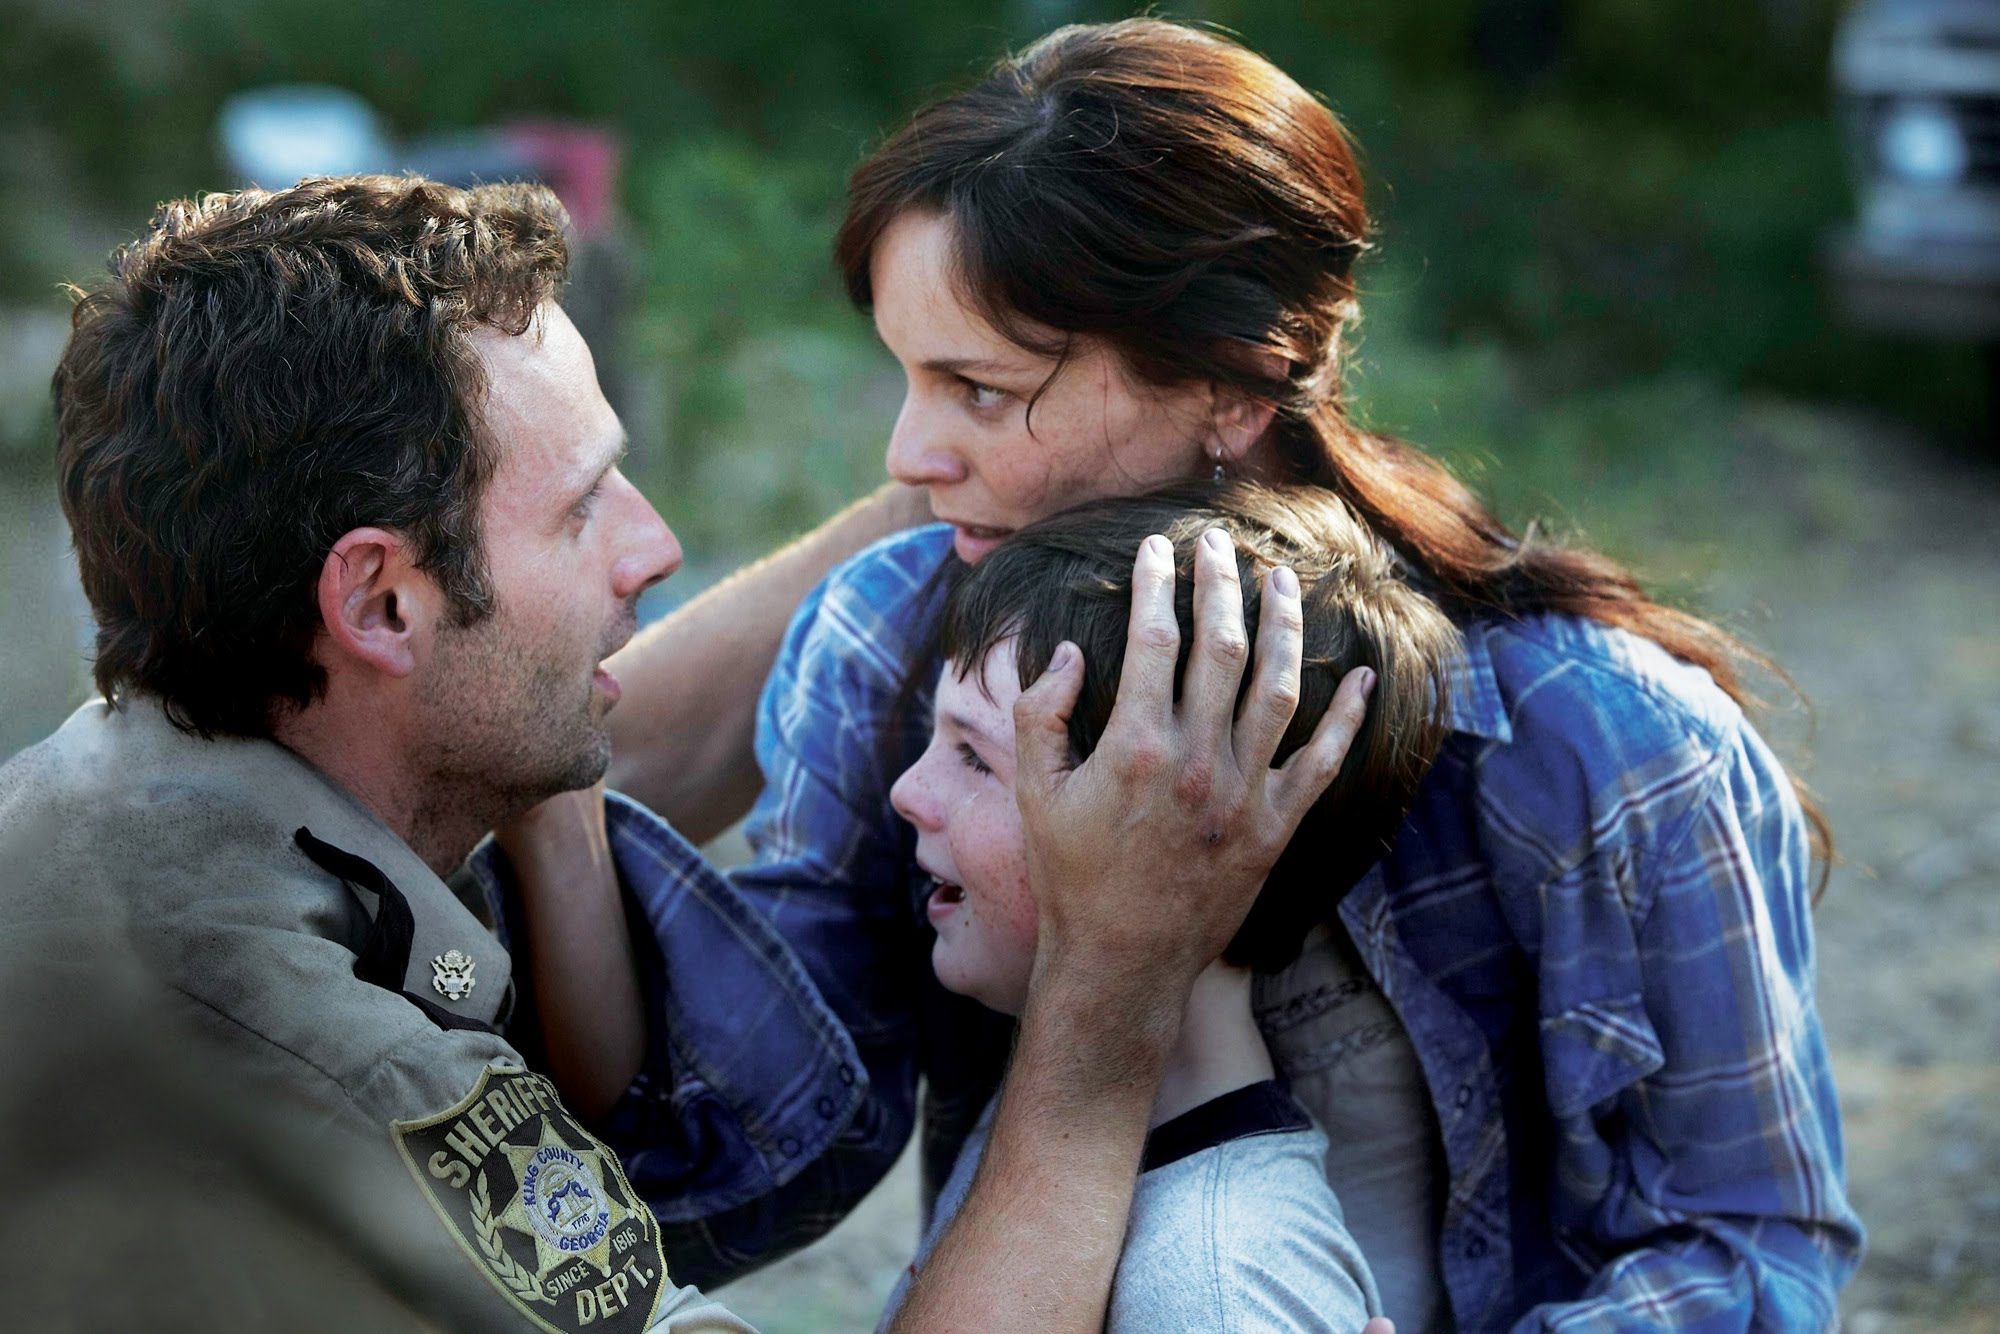 The 1 Moment From Each Season of ‘The Walking Dead’ That Predicted Major Events